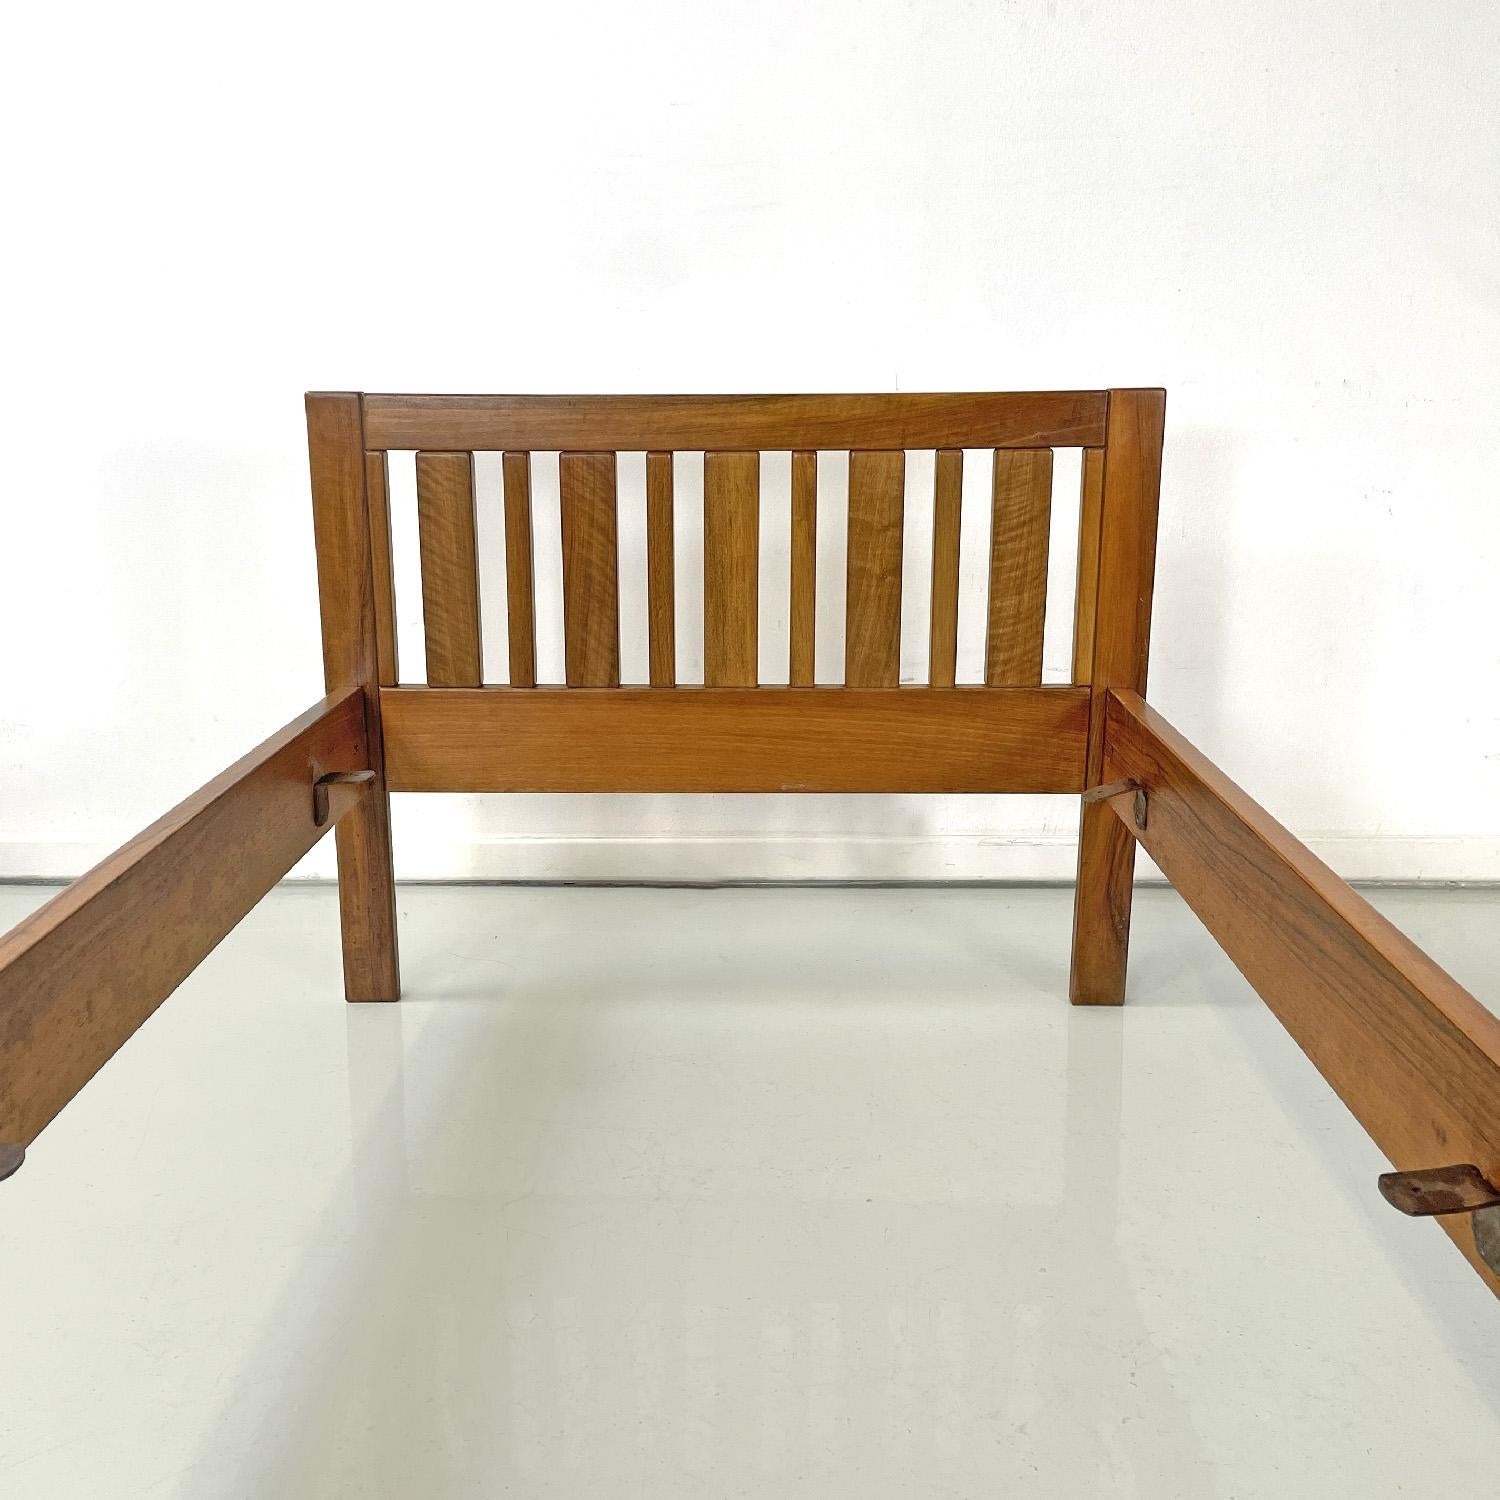 Italian mid-century modern bed by Ettore Sottsass for Poltronova, 1960s For Sale 1